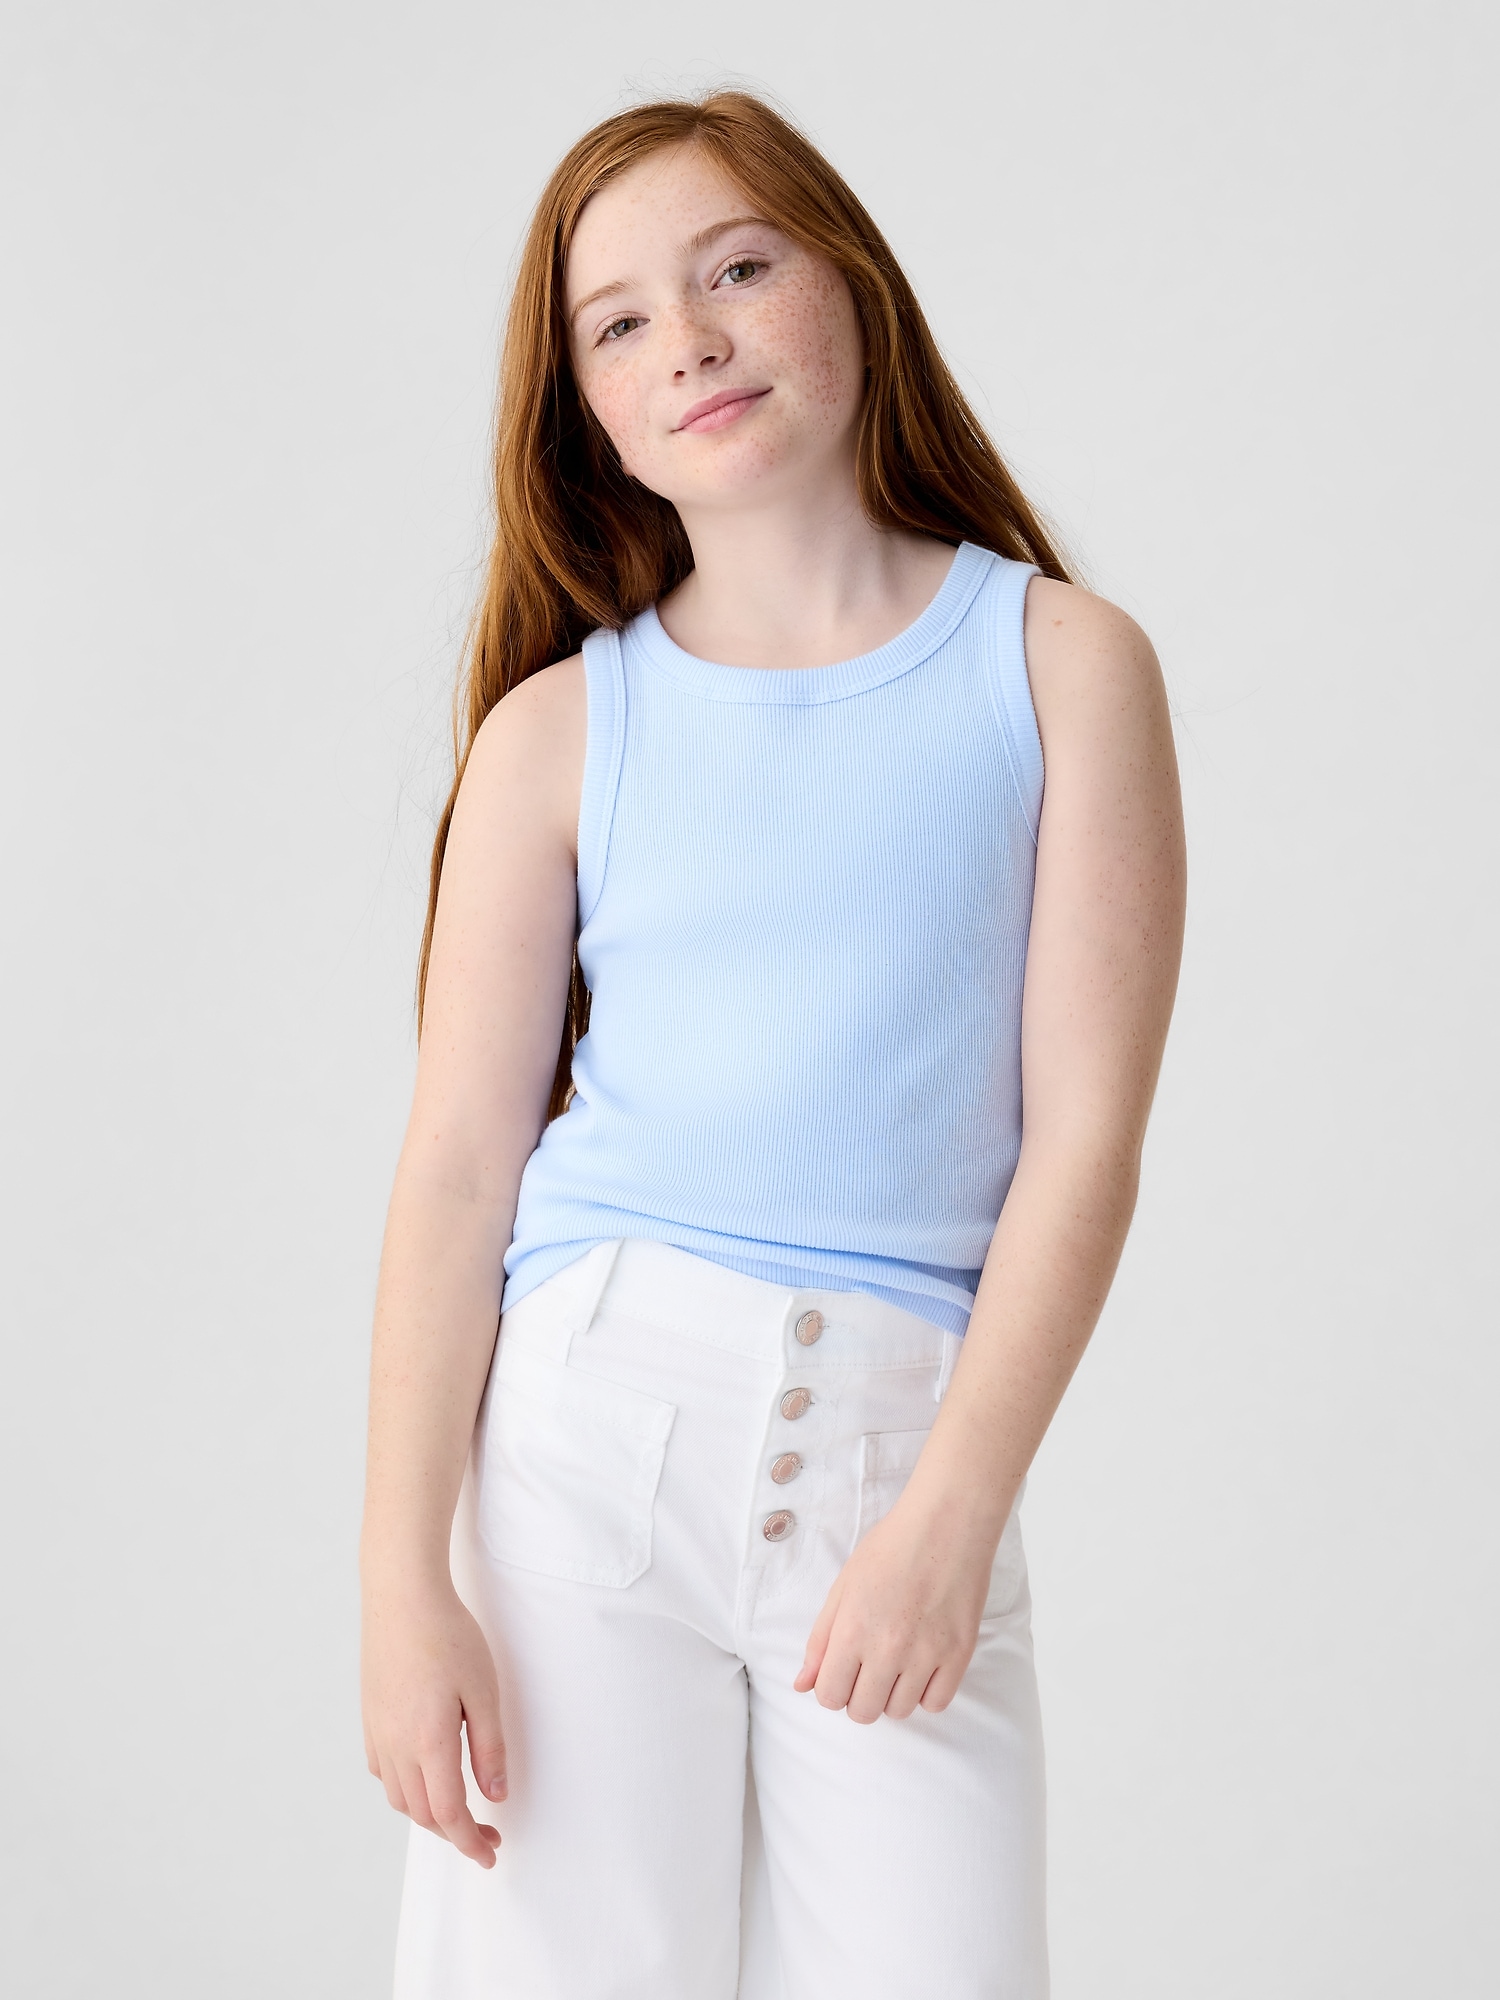 Shop Girl LTHTRGRB08 PROJECT GAP Cropped Rib Tank Top - 90 AED in